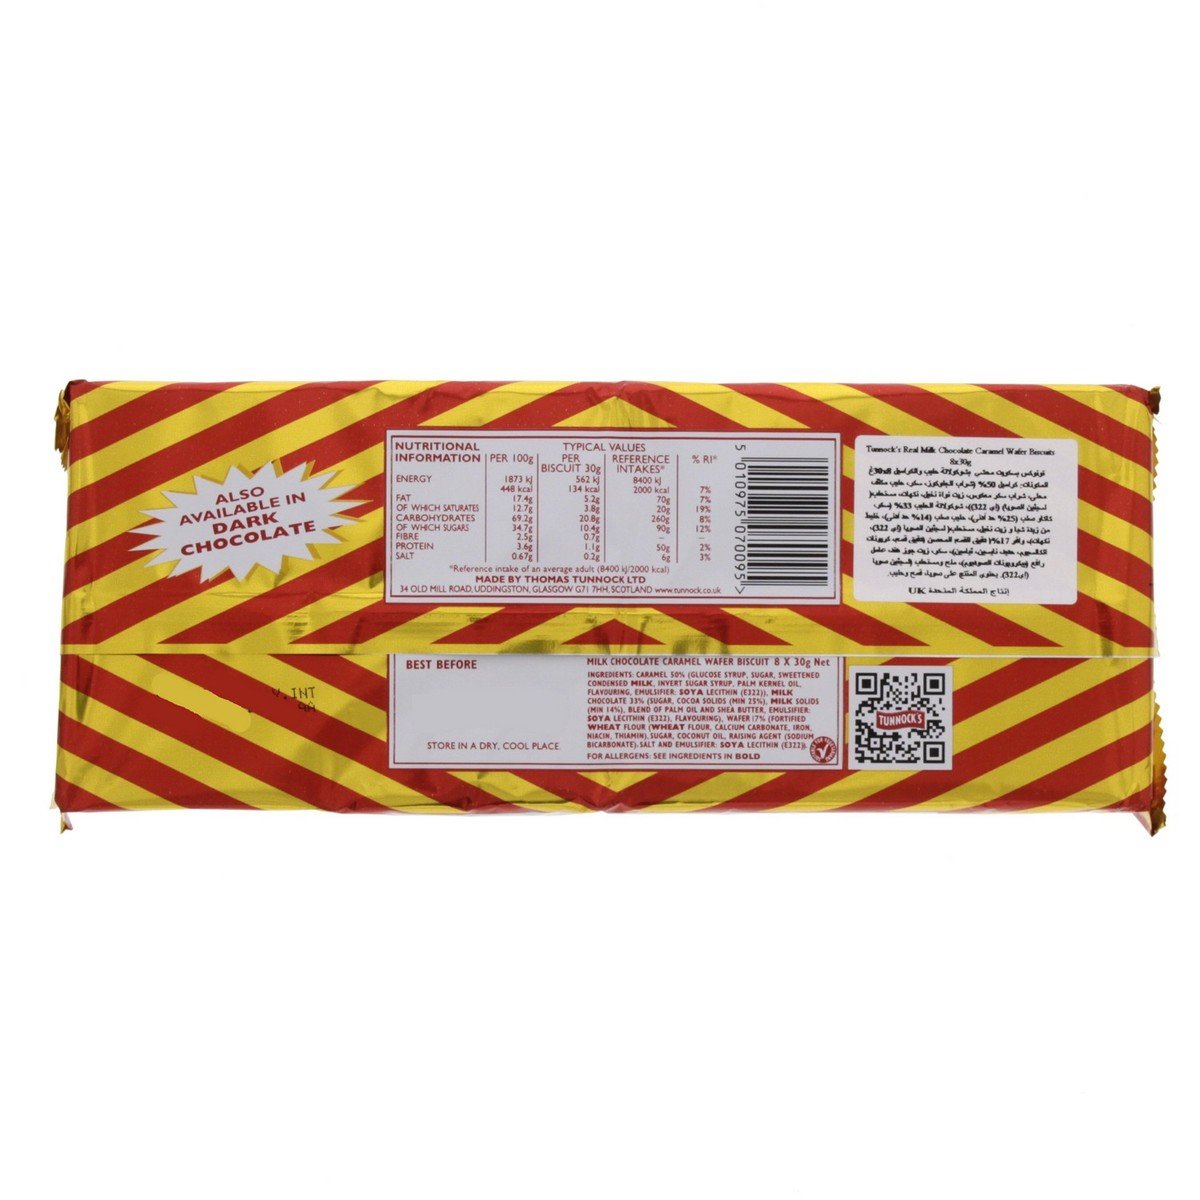 Tunnock's Real Milk Chocolate Caramel Wafer Biscuit 8 x 30g